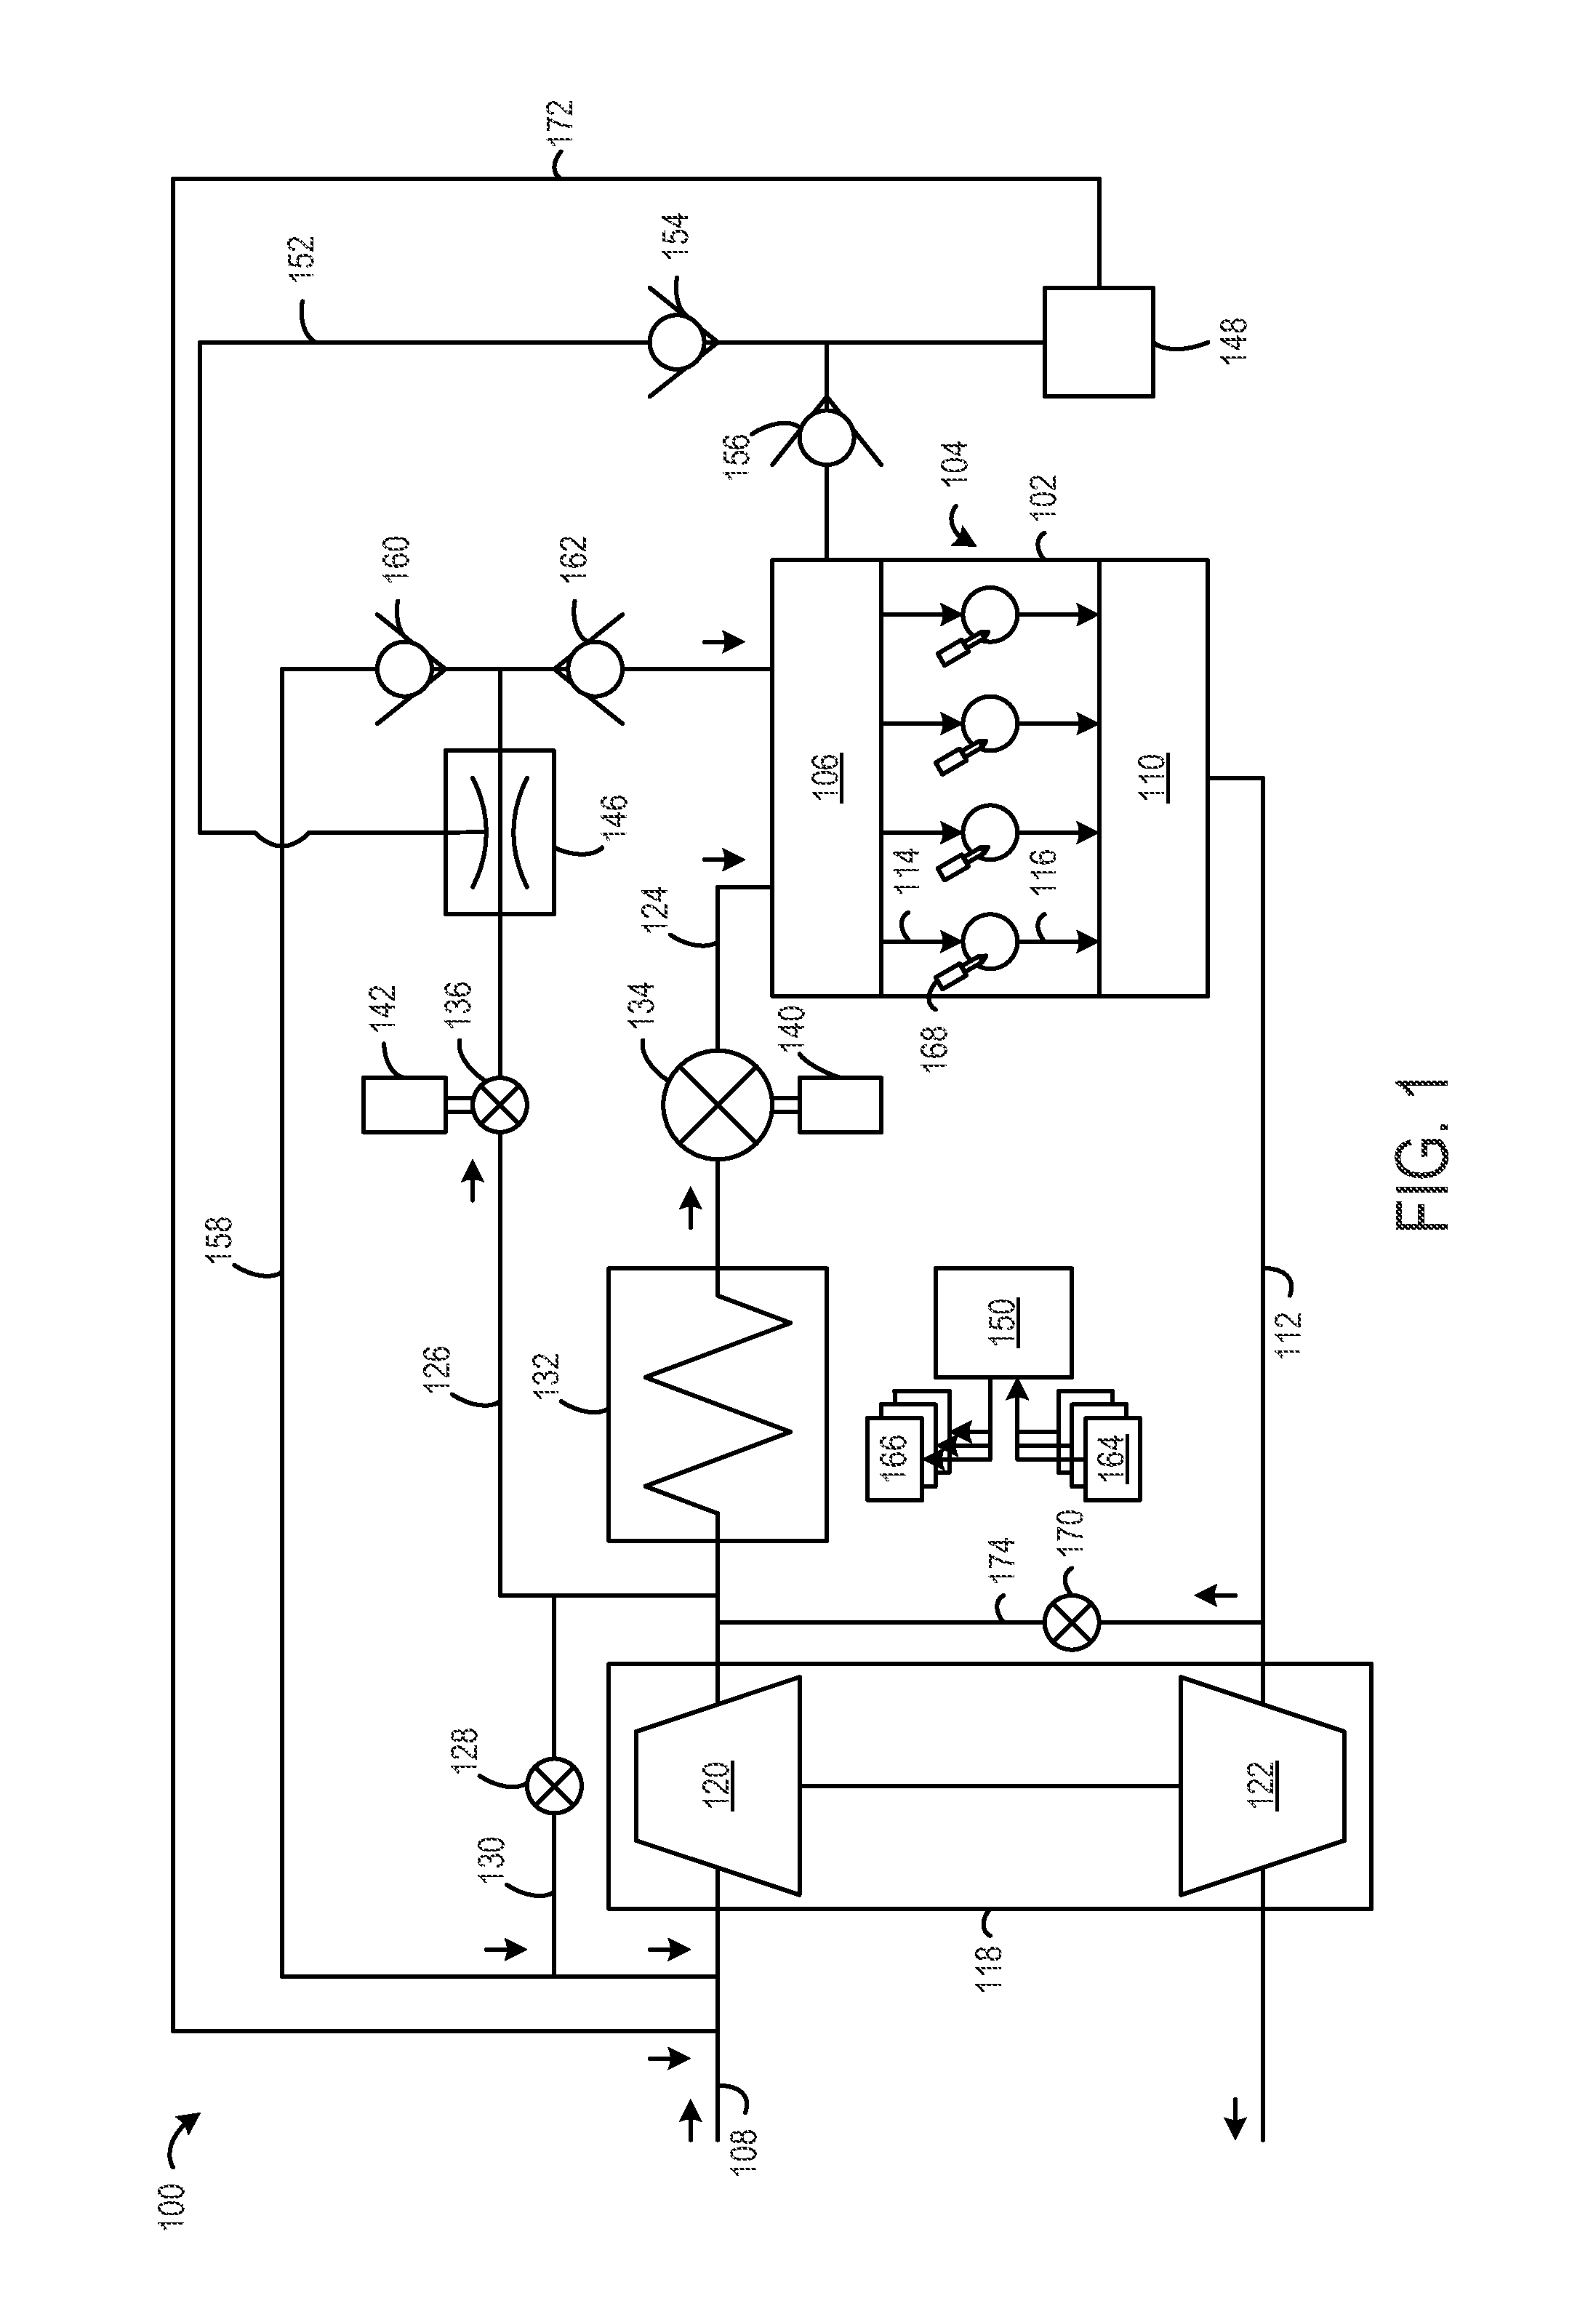 Throttle valve system for an engine